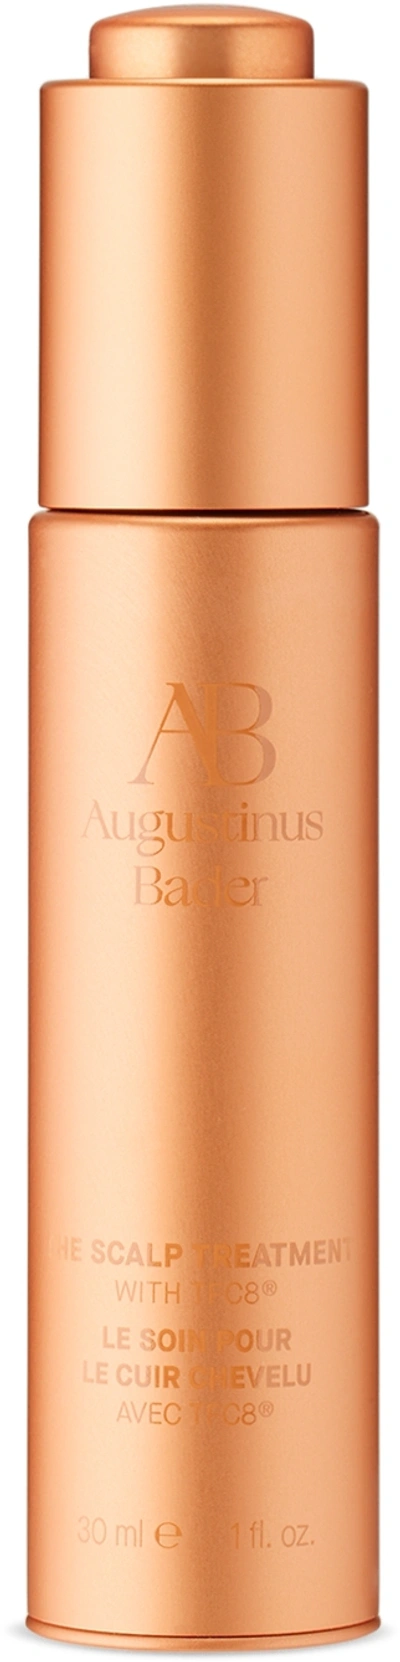 Augustinus Bader 'the Scalp Treatment', 30 ml In Na